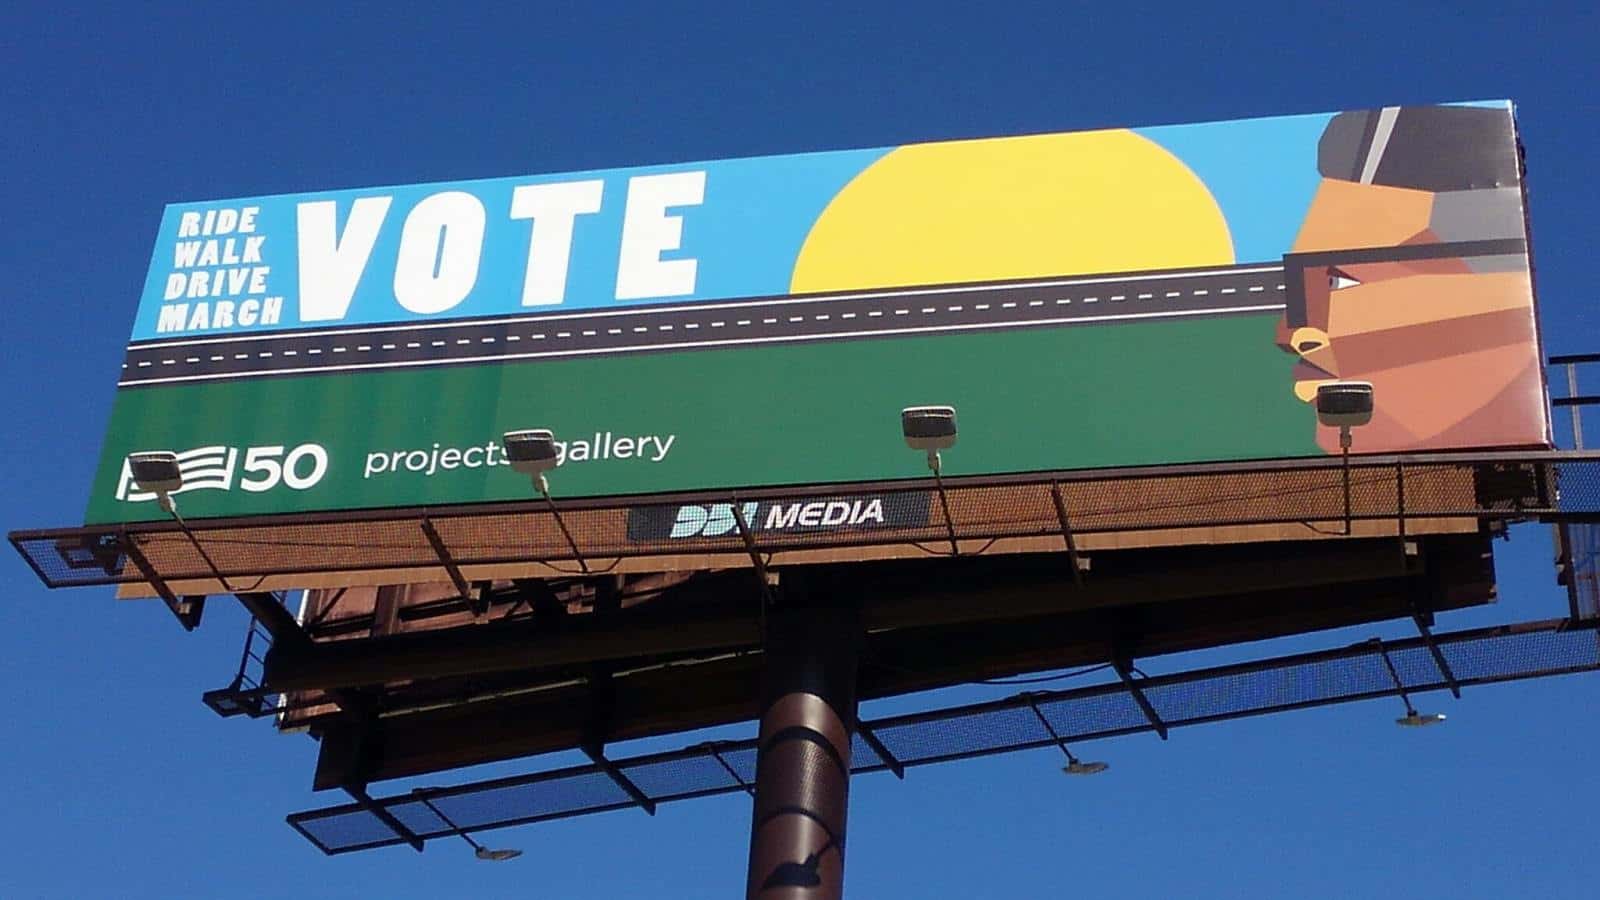 For Freedoms, 50 State Initiative, billboard art, political art, 2018 elections, Donald Trump